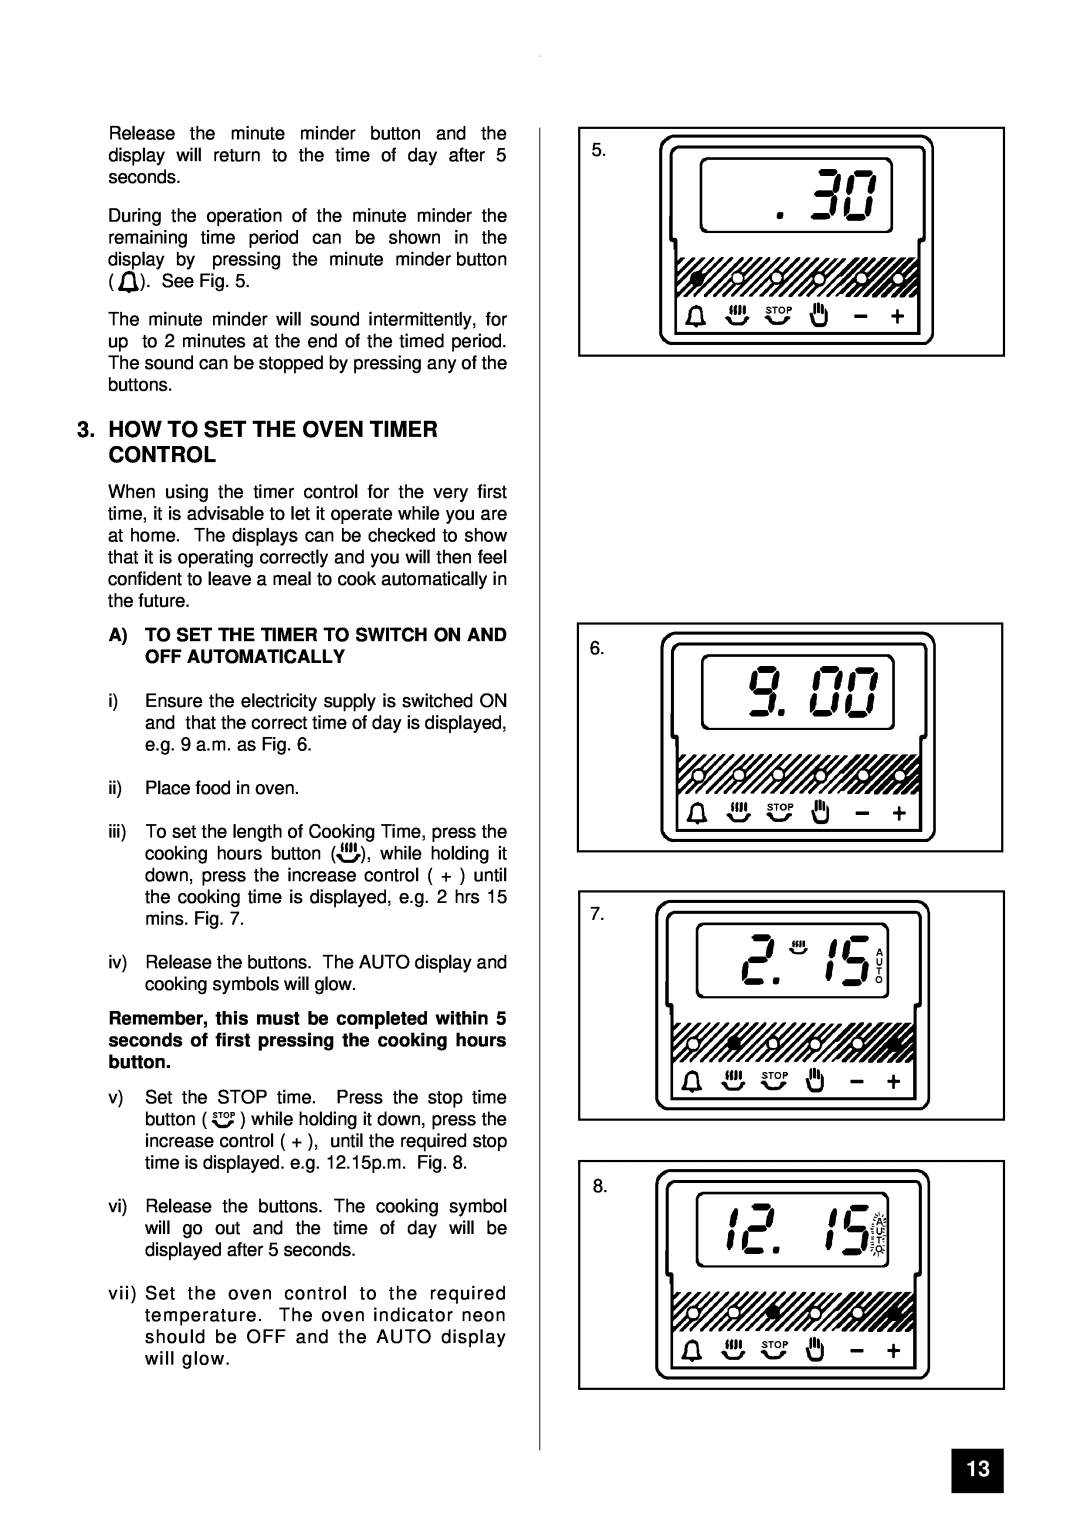 Tricity Bendix CSI 2500 installation instructions How To Set The Oven Timer Control 